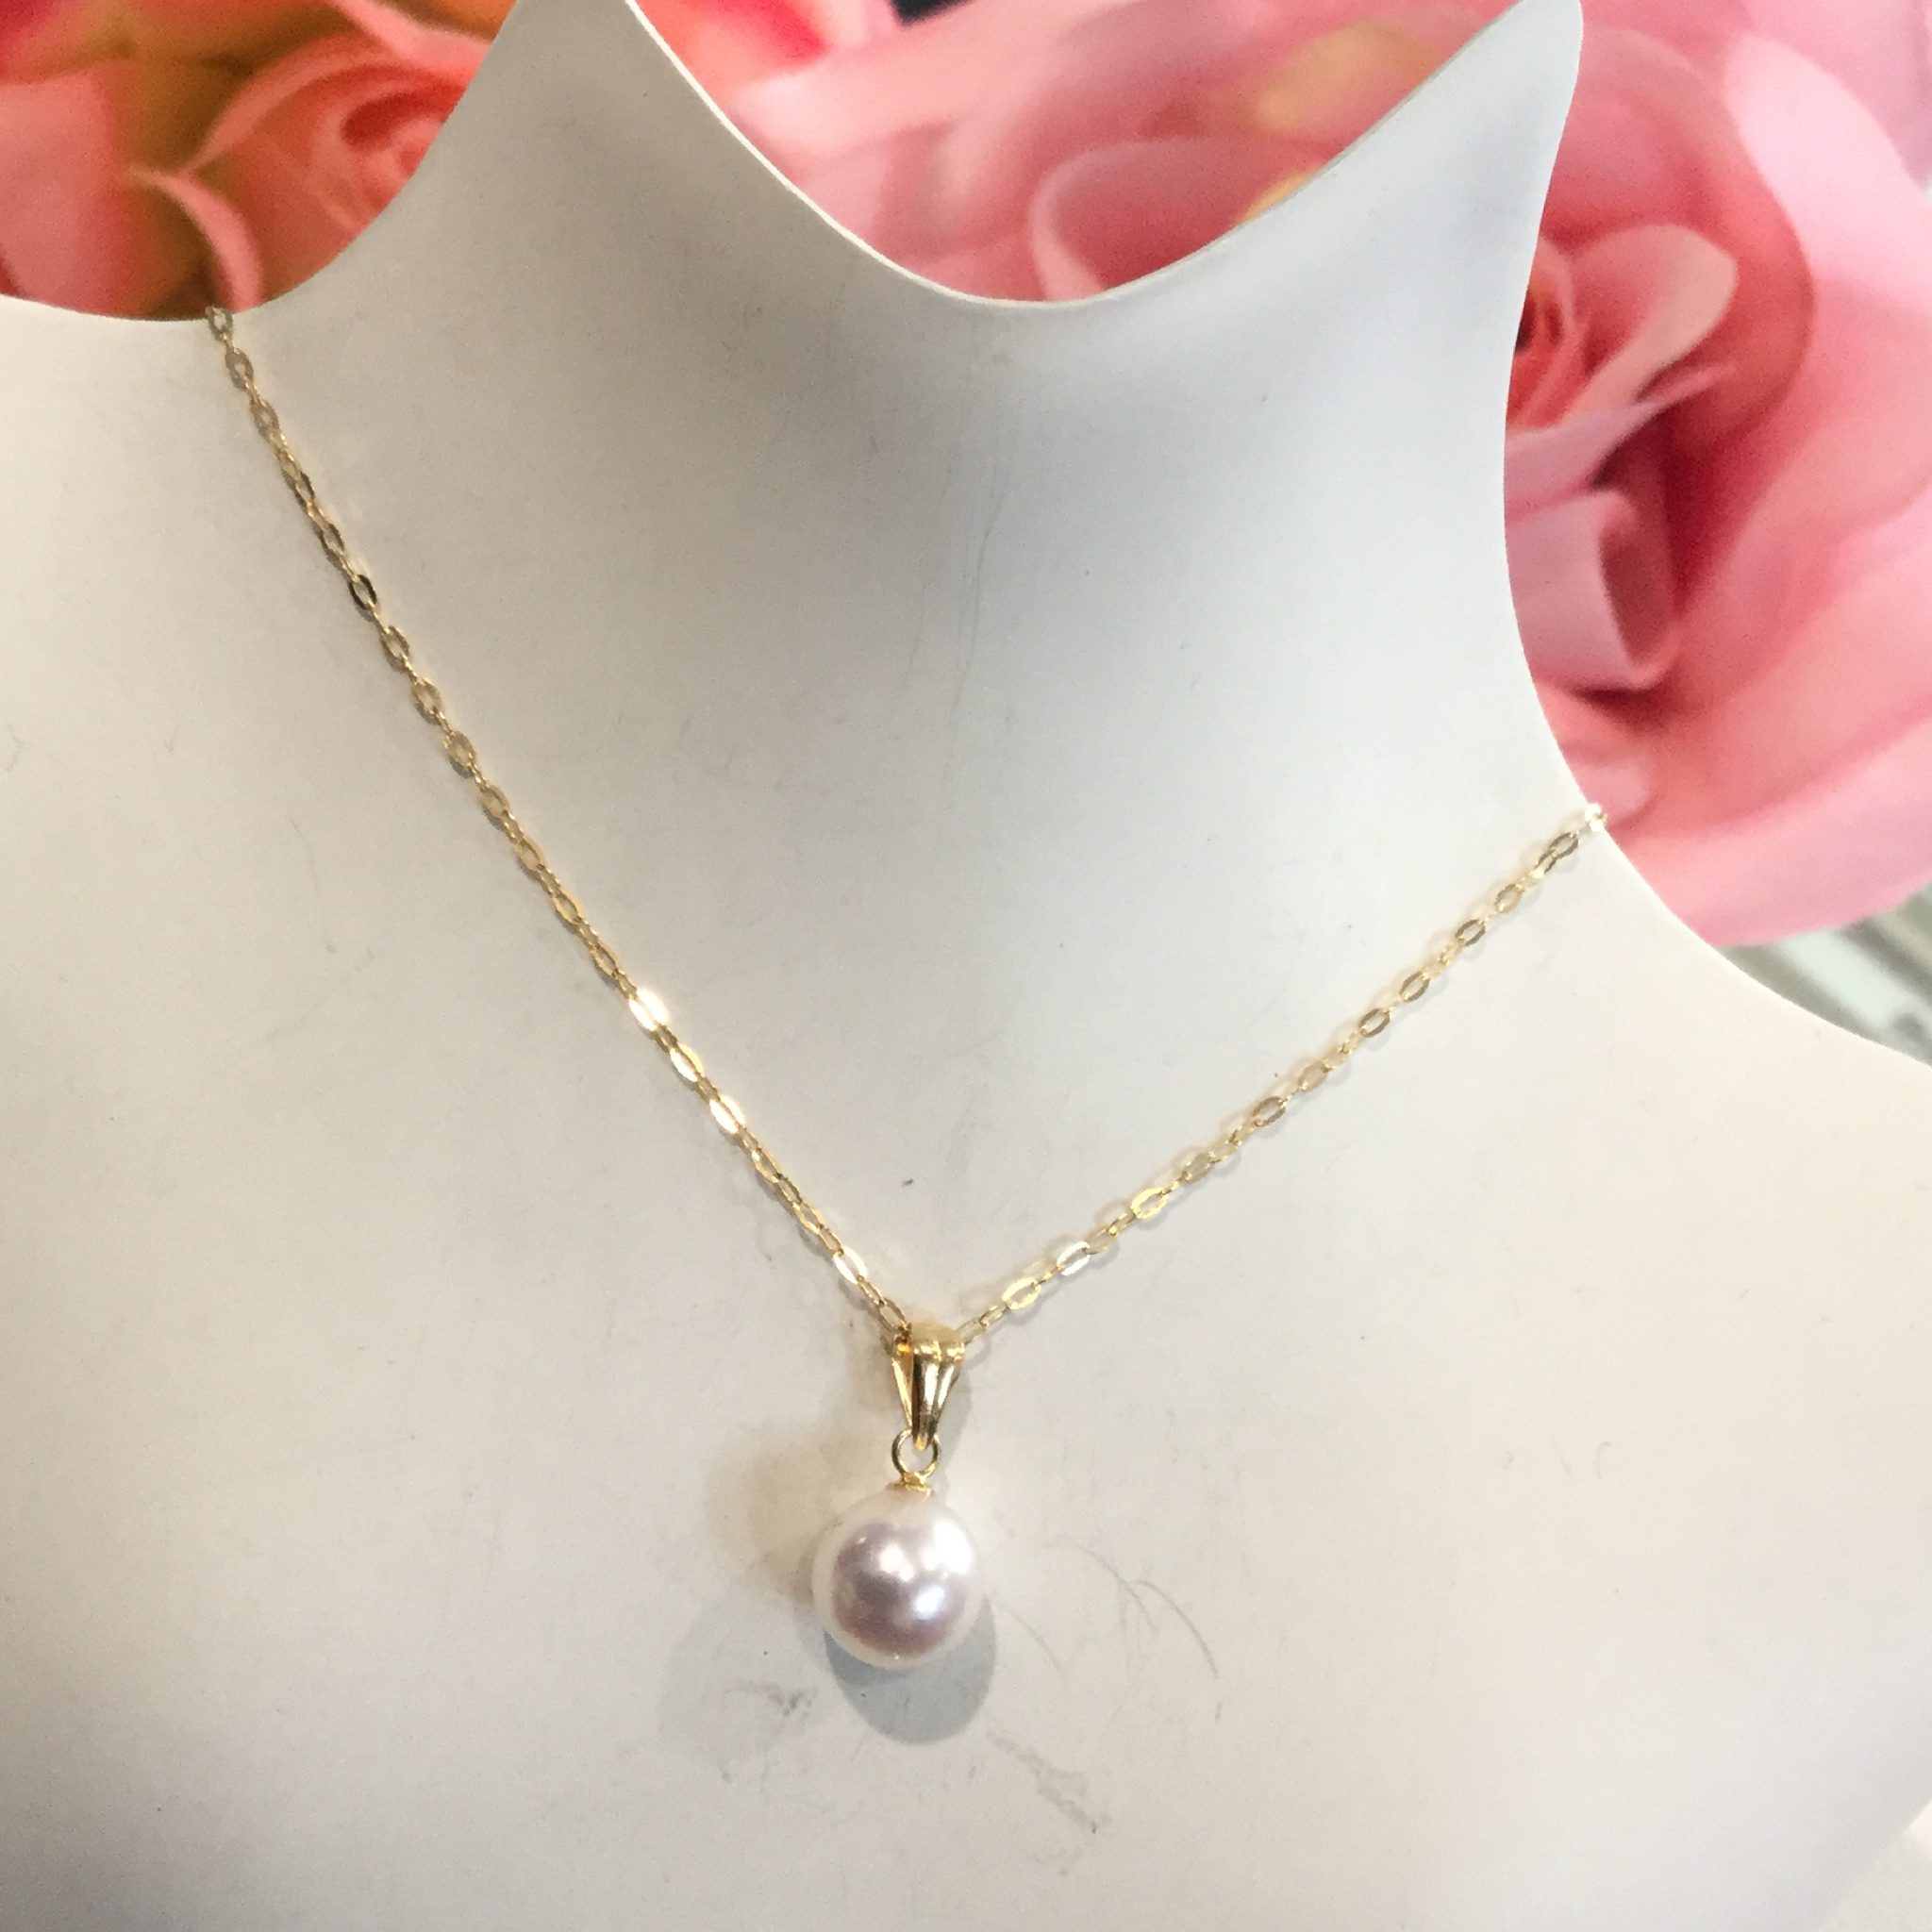 K18 アコヤ 真珠 パールネックレス / K18 7mm akoya pearl necklace | A.I JEWELRIES / エイ